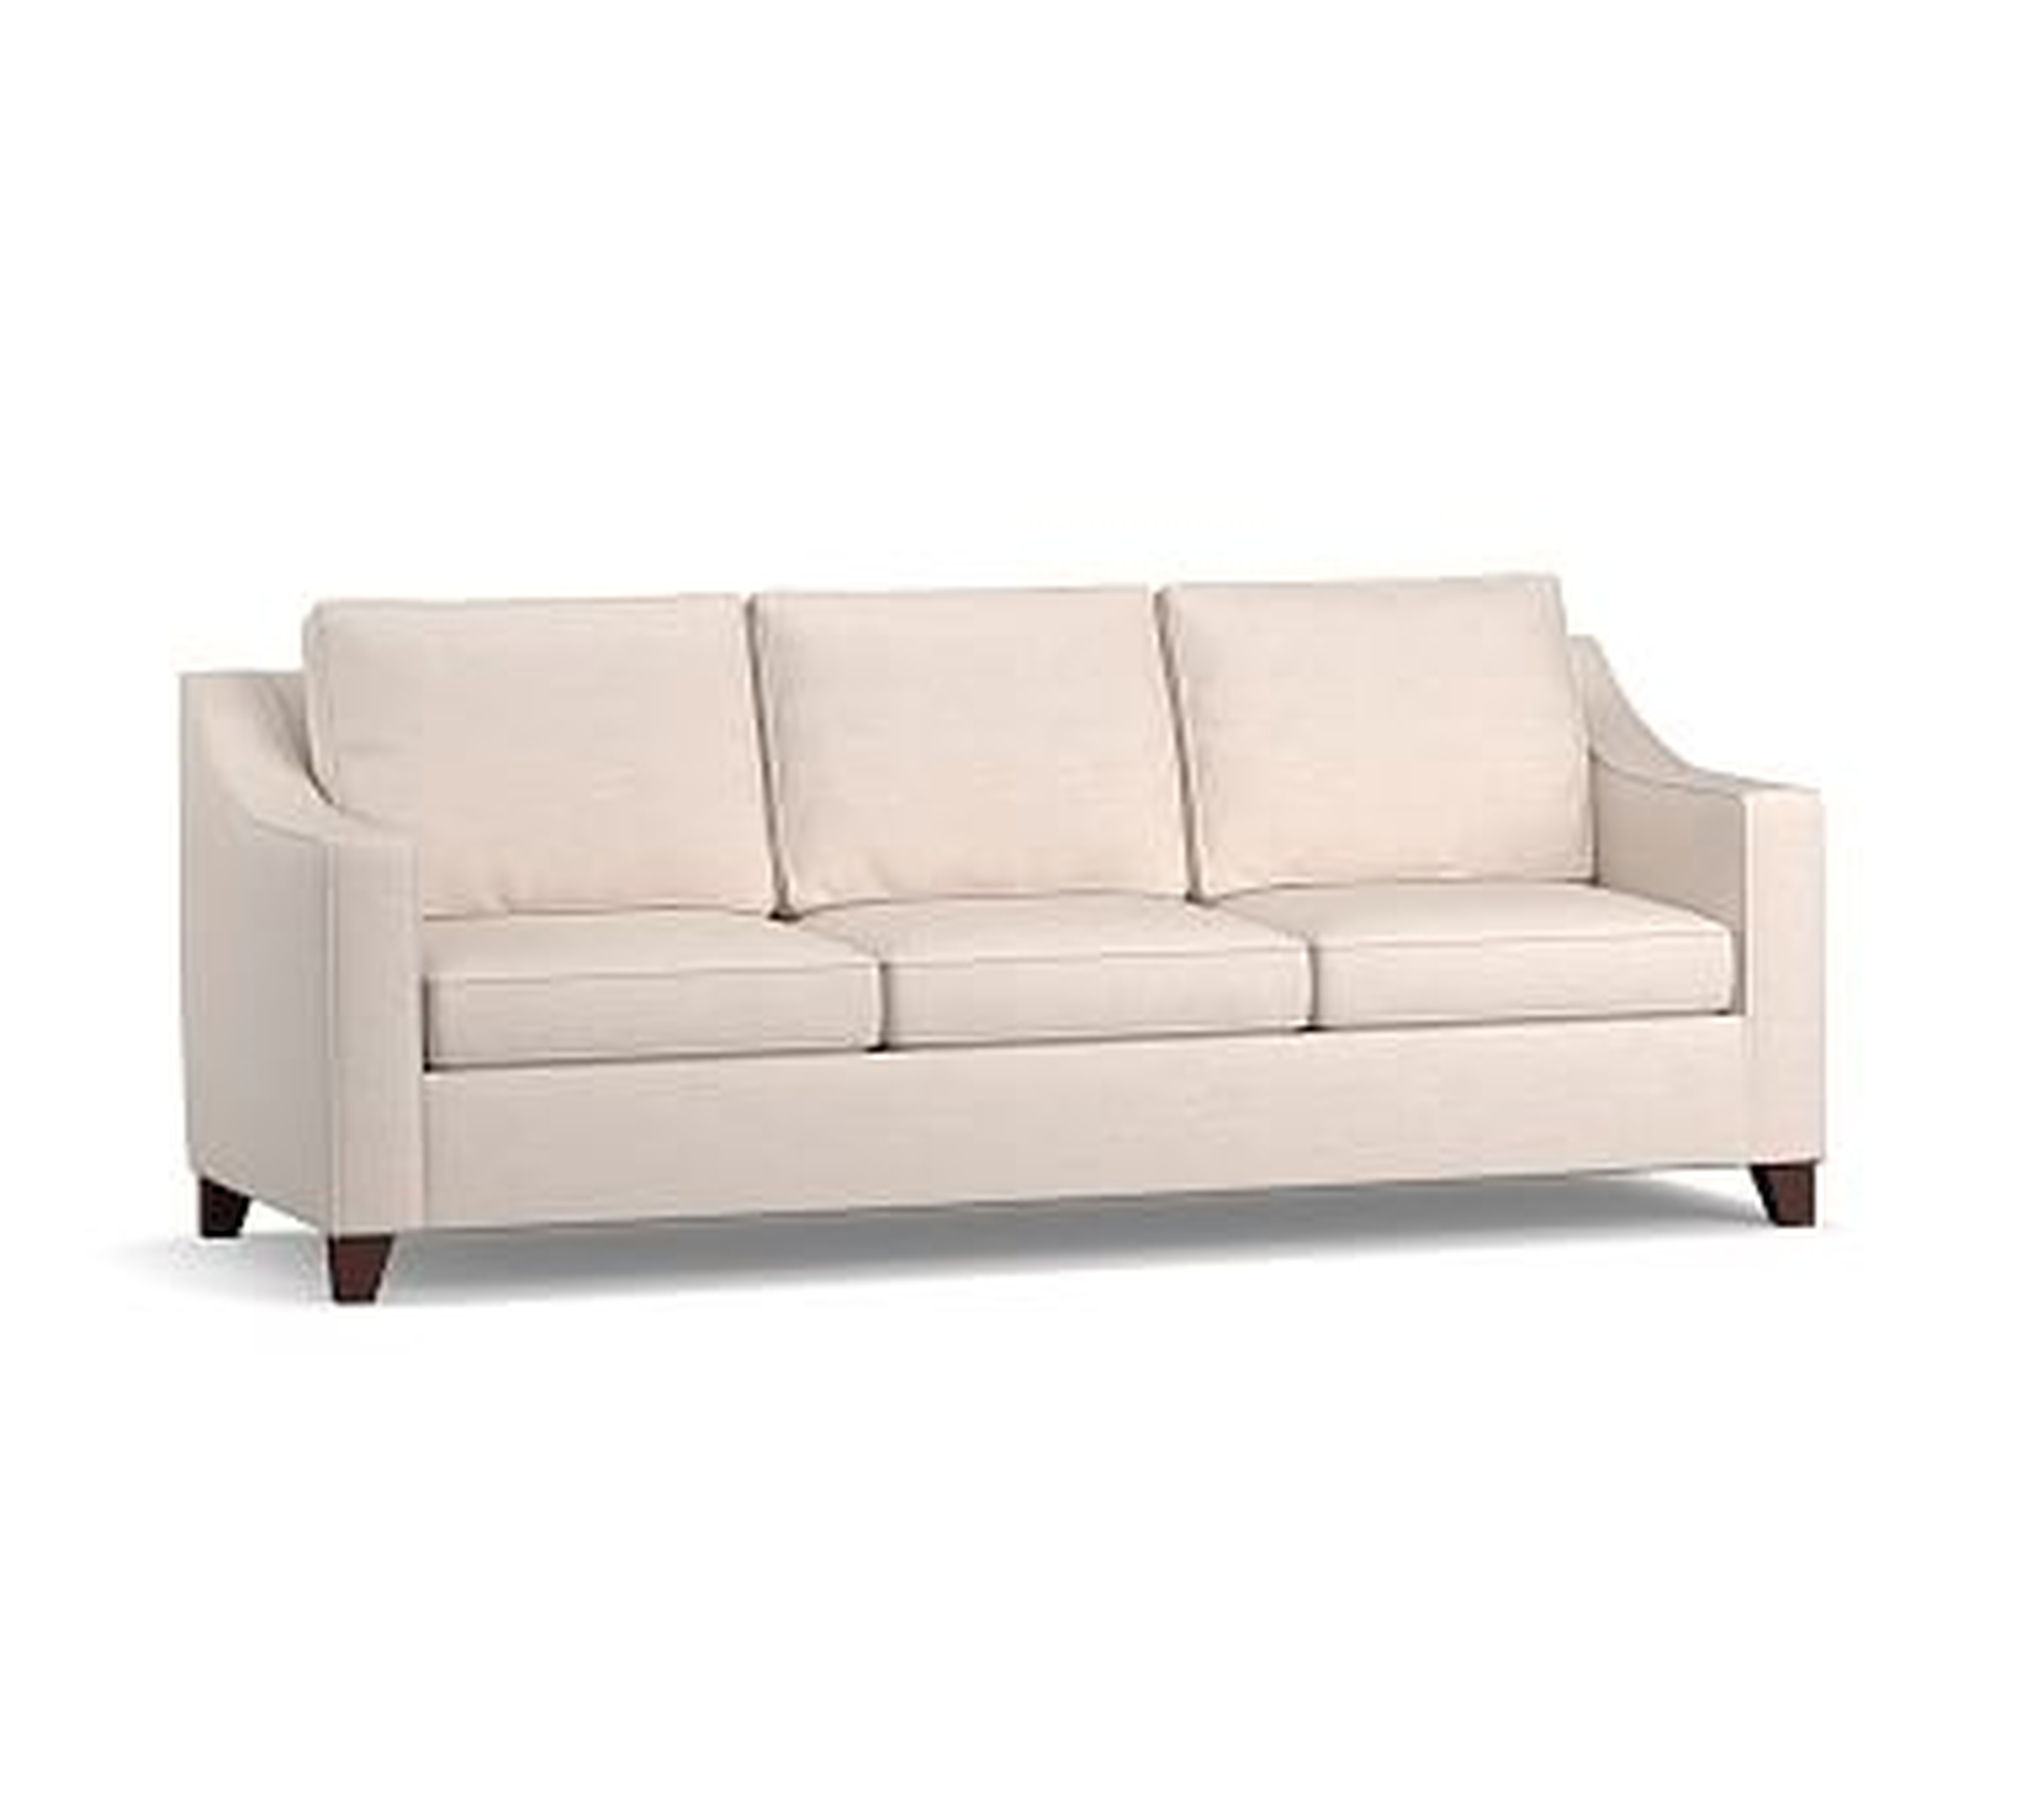 Cameron Slope Arm Upholstered Grand Sofa 95.5" 3-Seater, Polyester Wrapped Cushions, Performance Heathered Tweed Desert - Pottery Barn